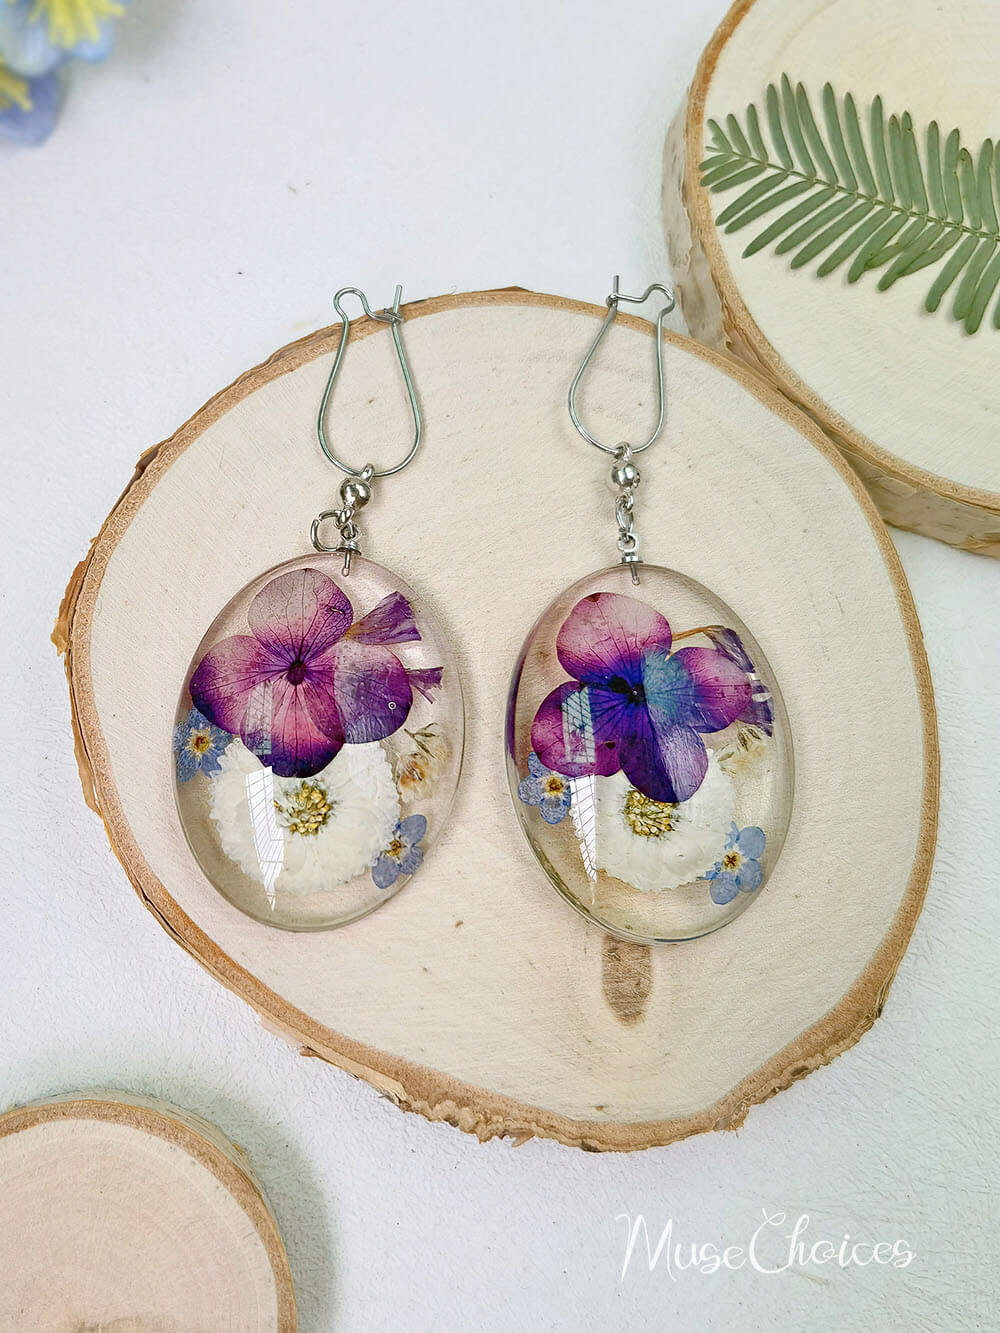 Resin Pressed Flower Earrings - Forget Me Not Pansy